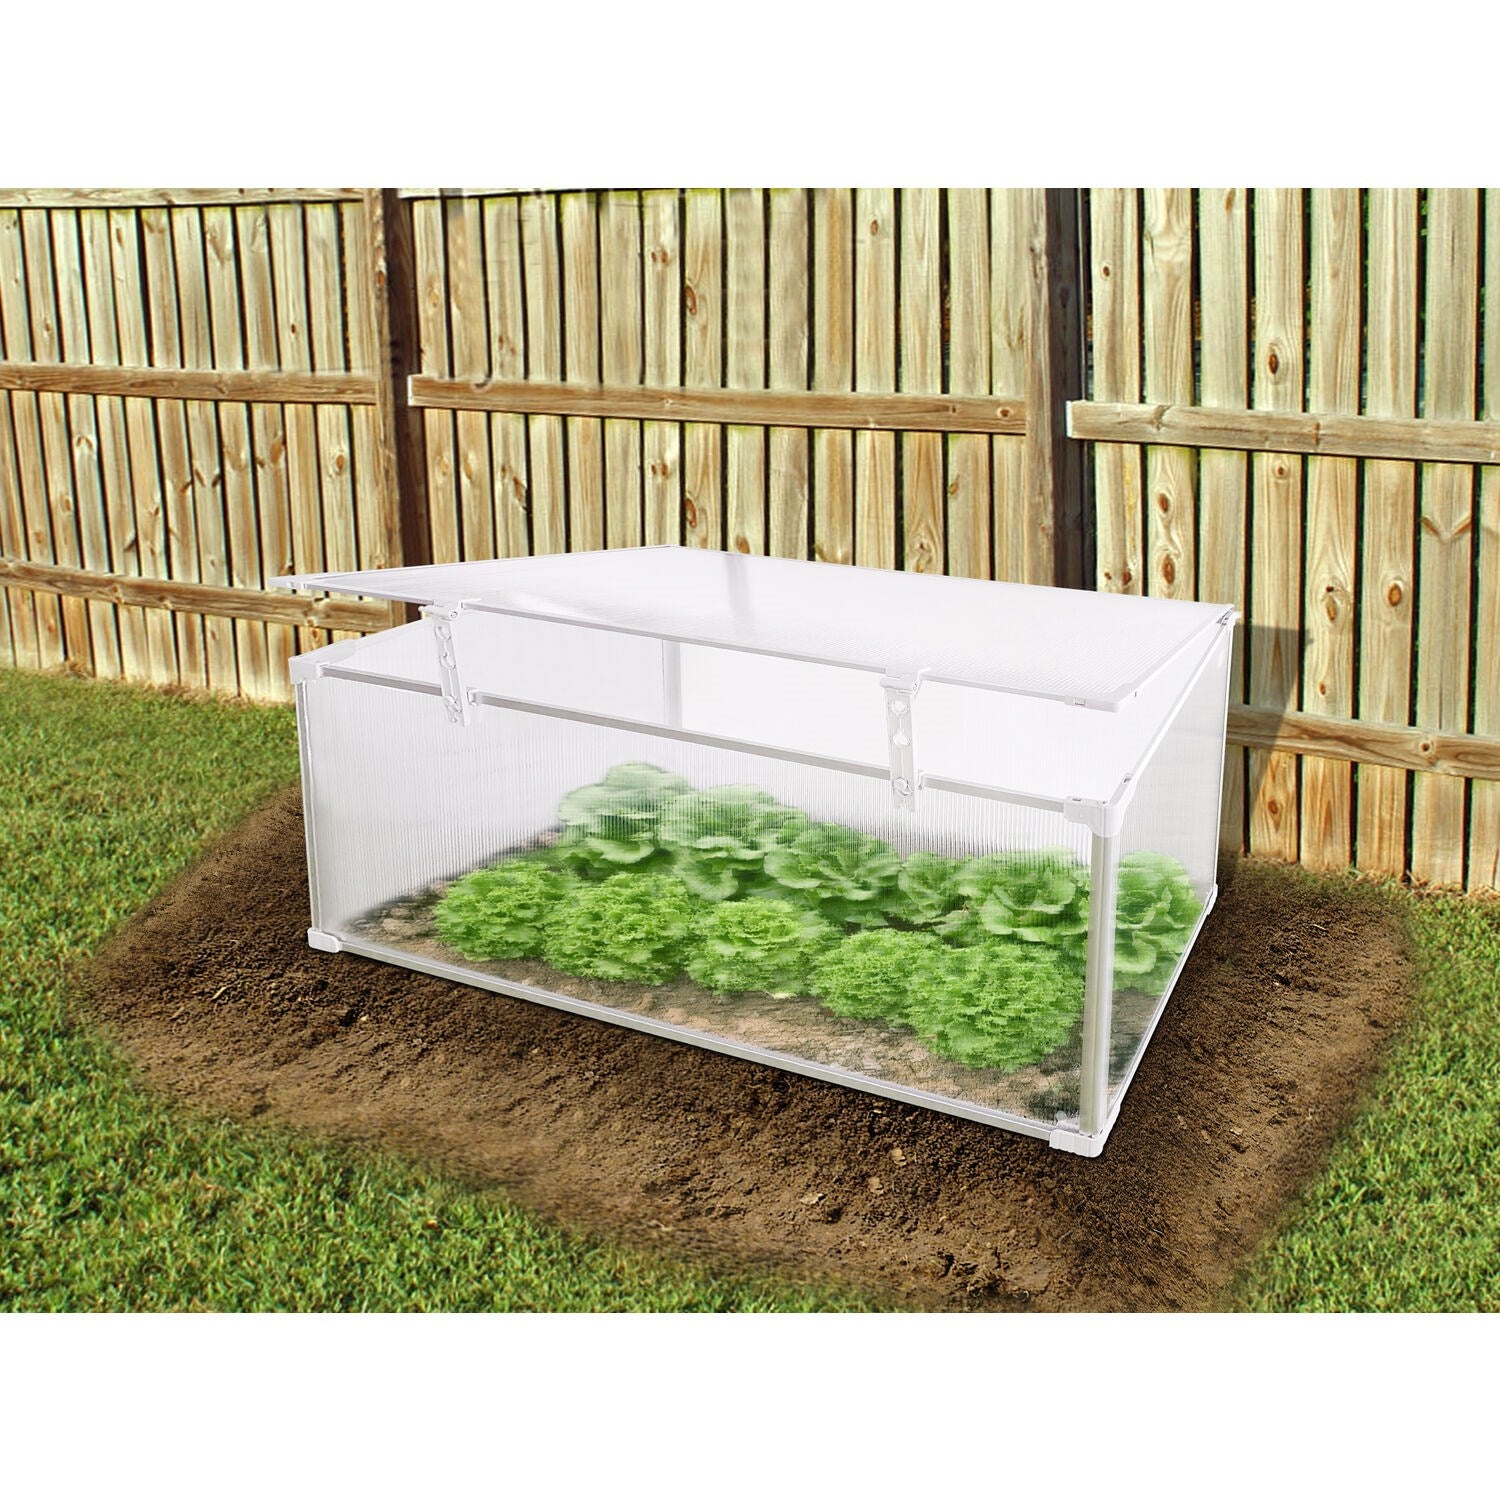 Hanover 47-In. Single Garden Bed Cold Frame Mini-Greenhouse Plant Protector - Lightweight and Portable